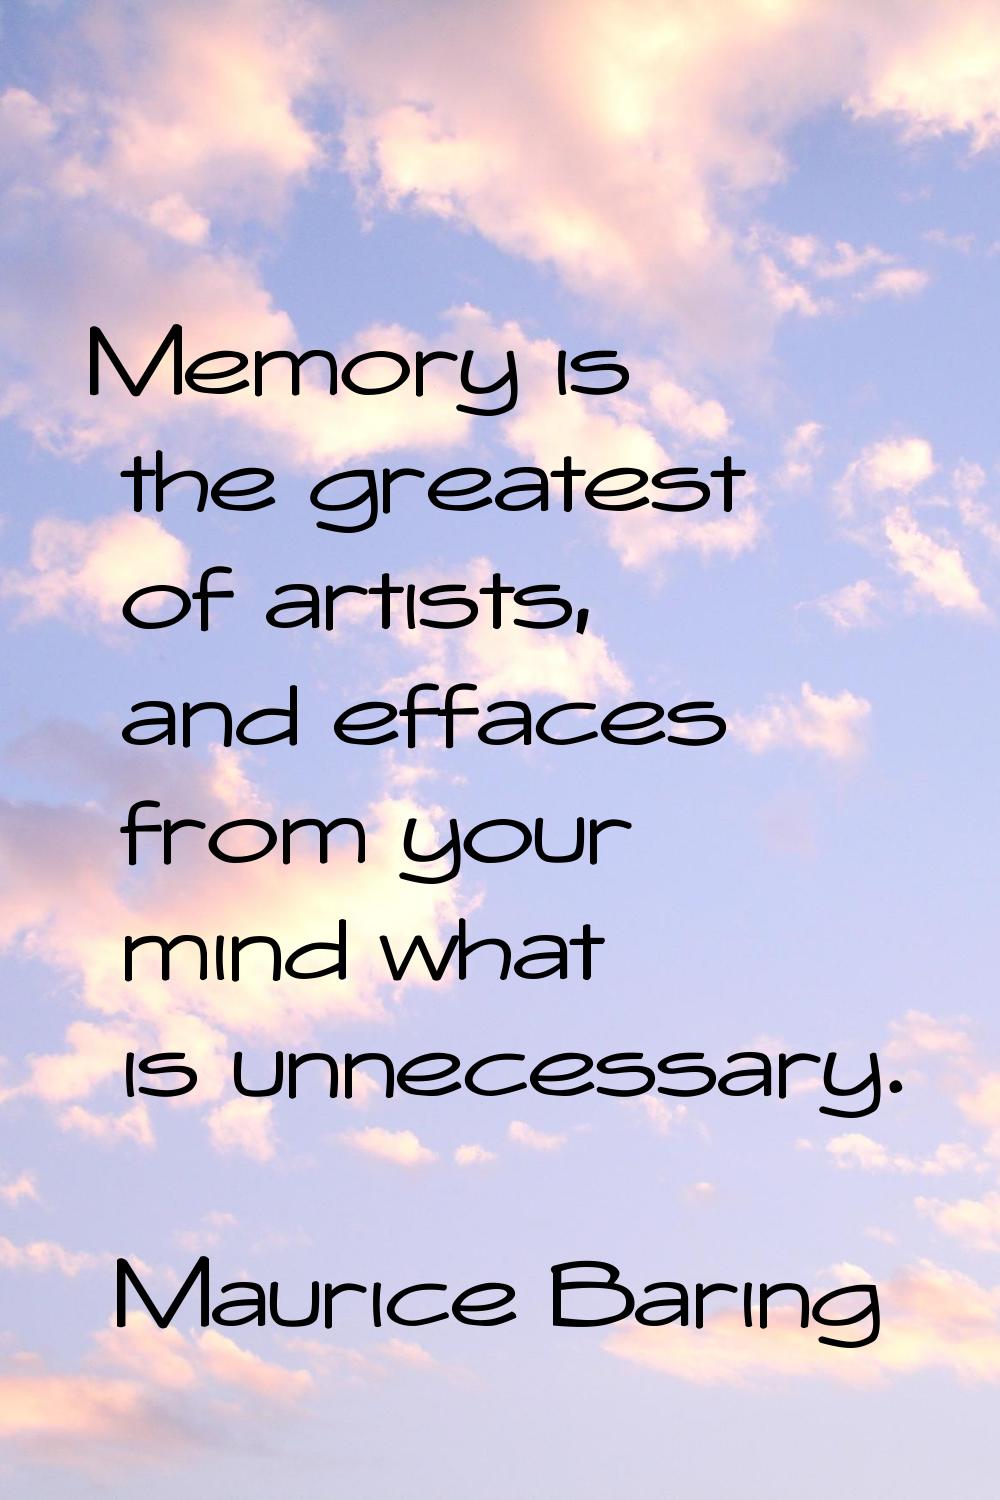 Memory is the greatest of artists, and effaces from your mind what is unnecessary.